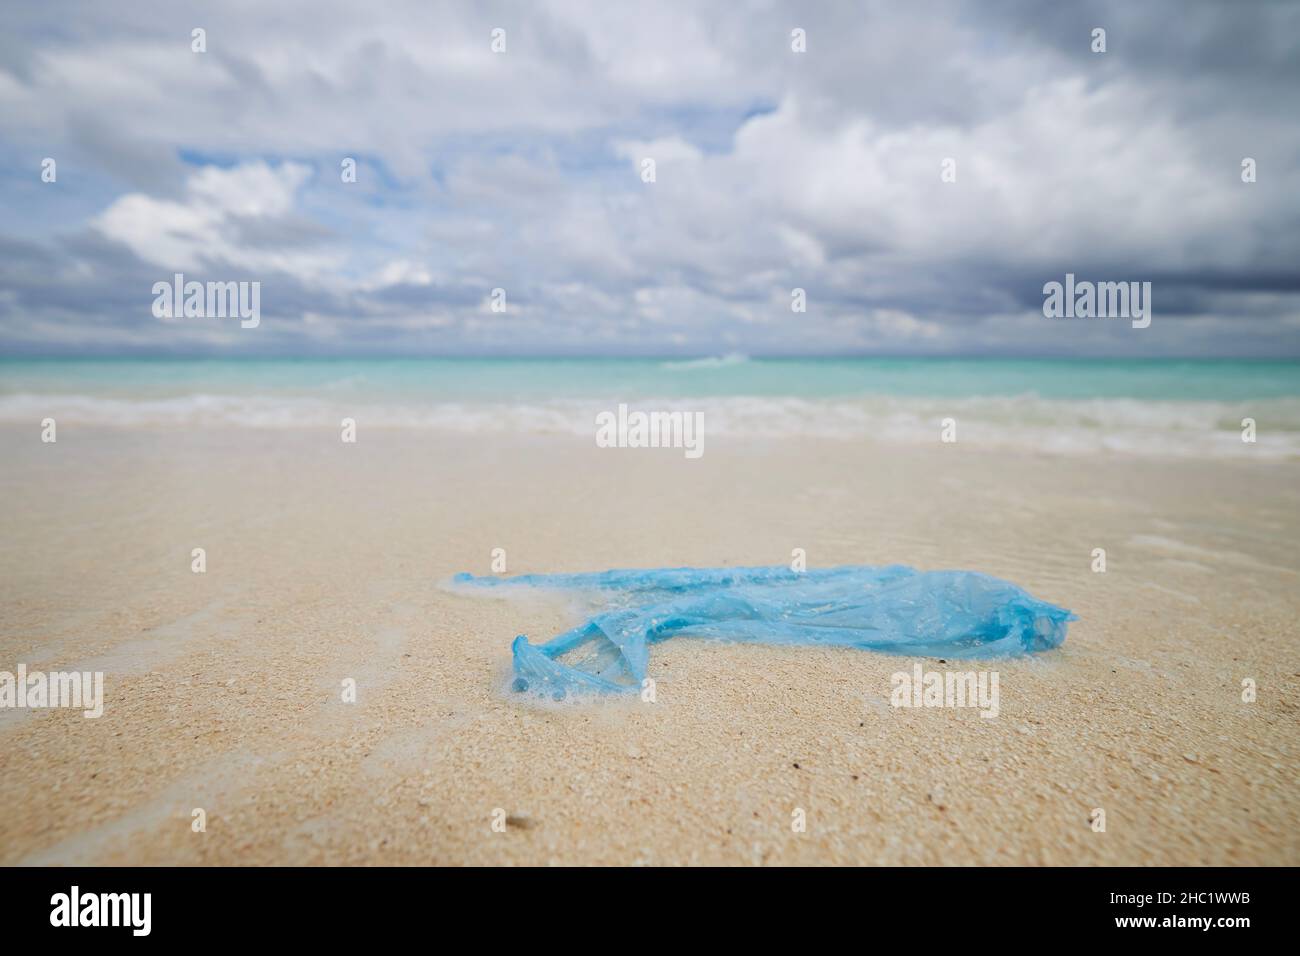 Abandoned plastic bag on sand beach against sea. Themes ocean pollution and environmental Issues. Stock Photo